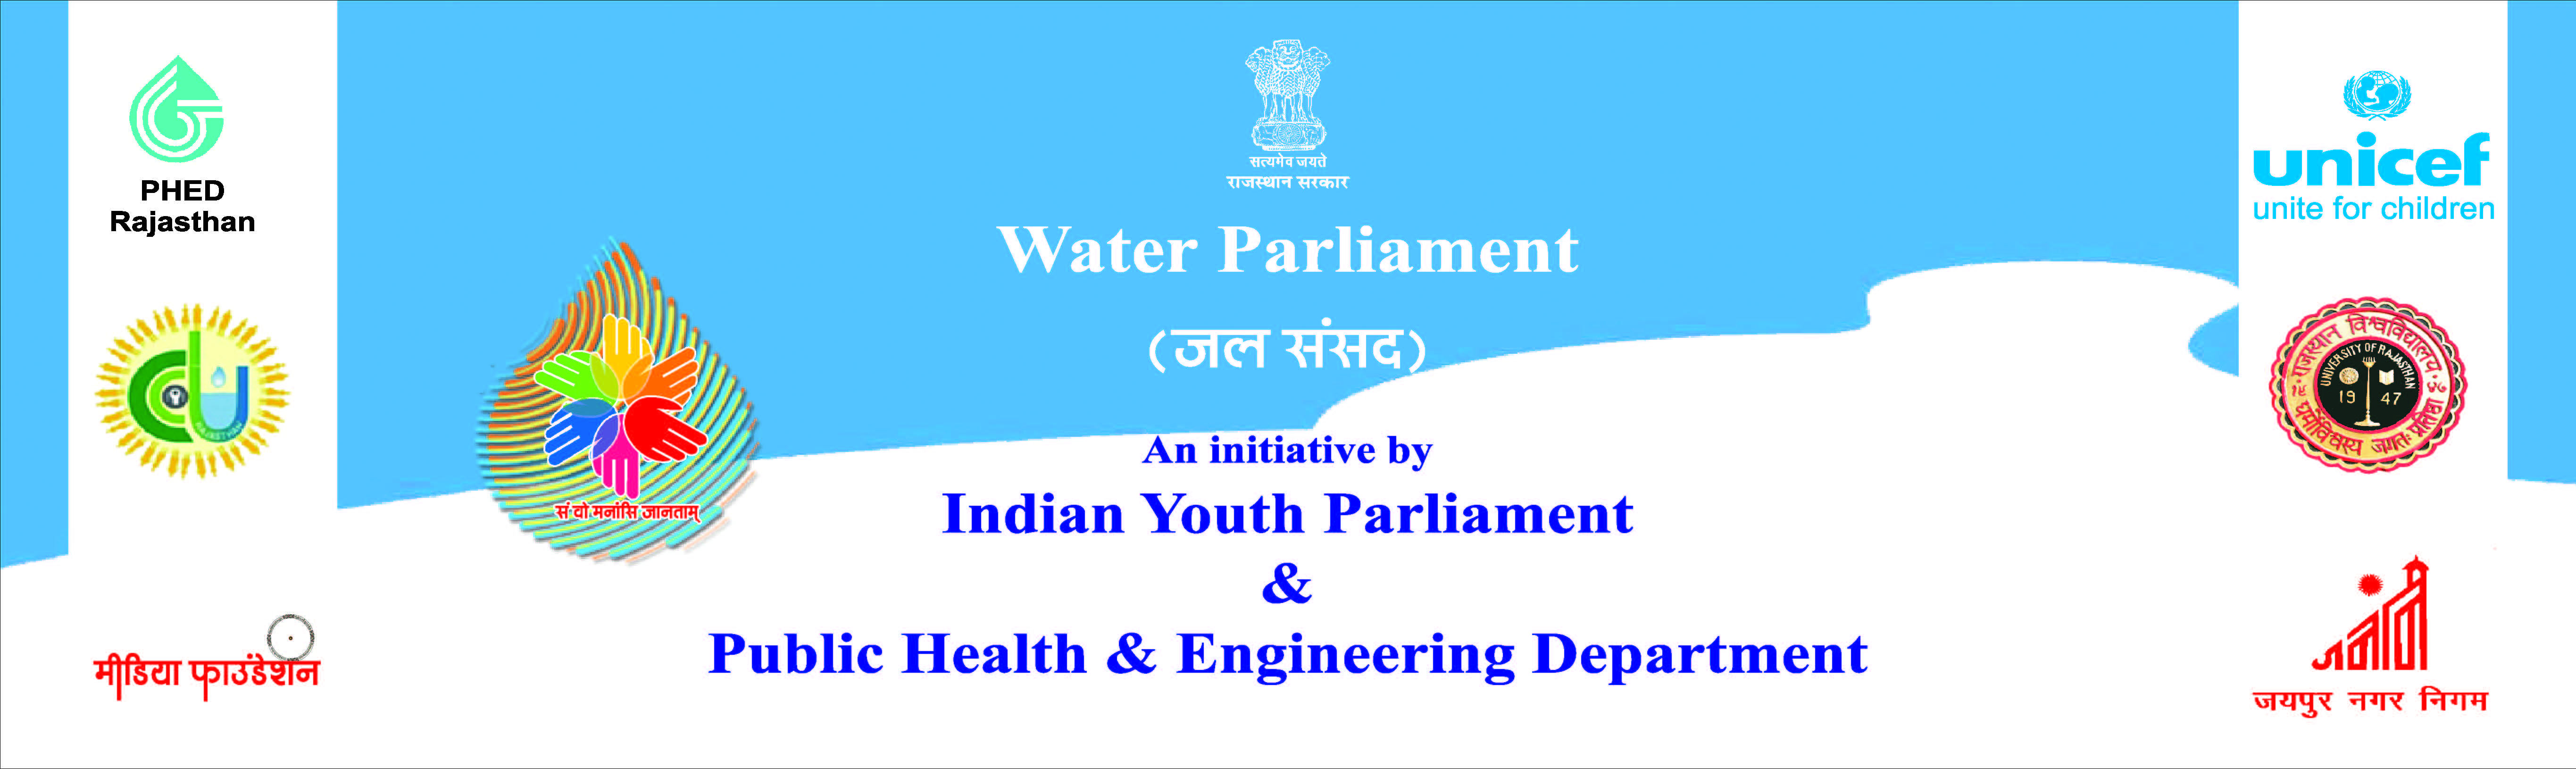 Water Parliament